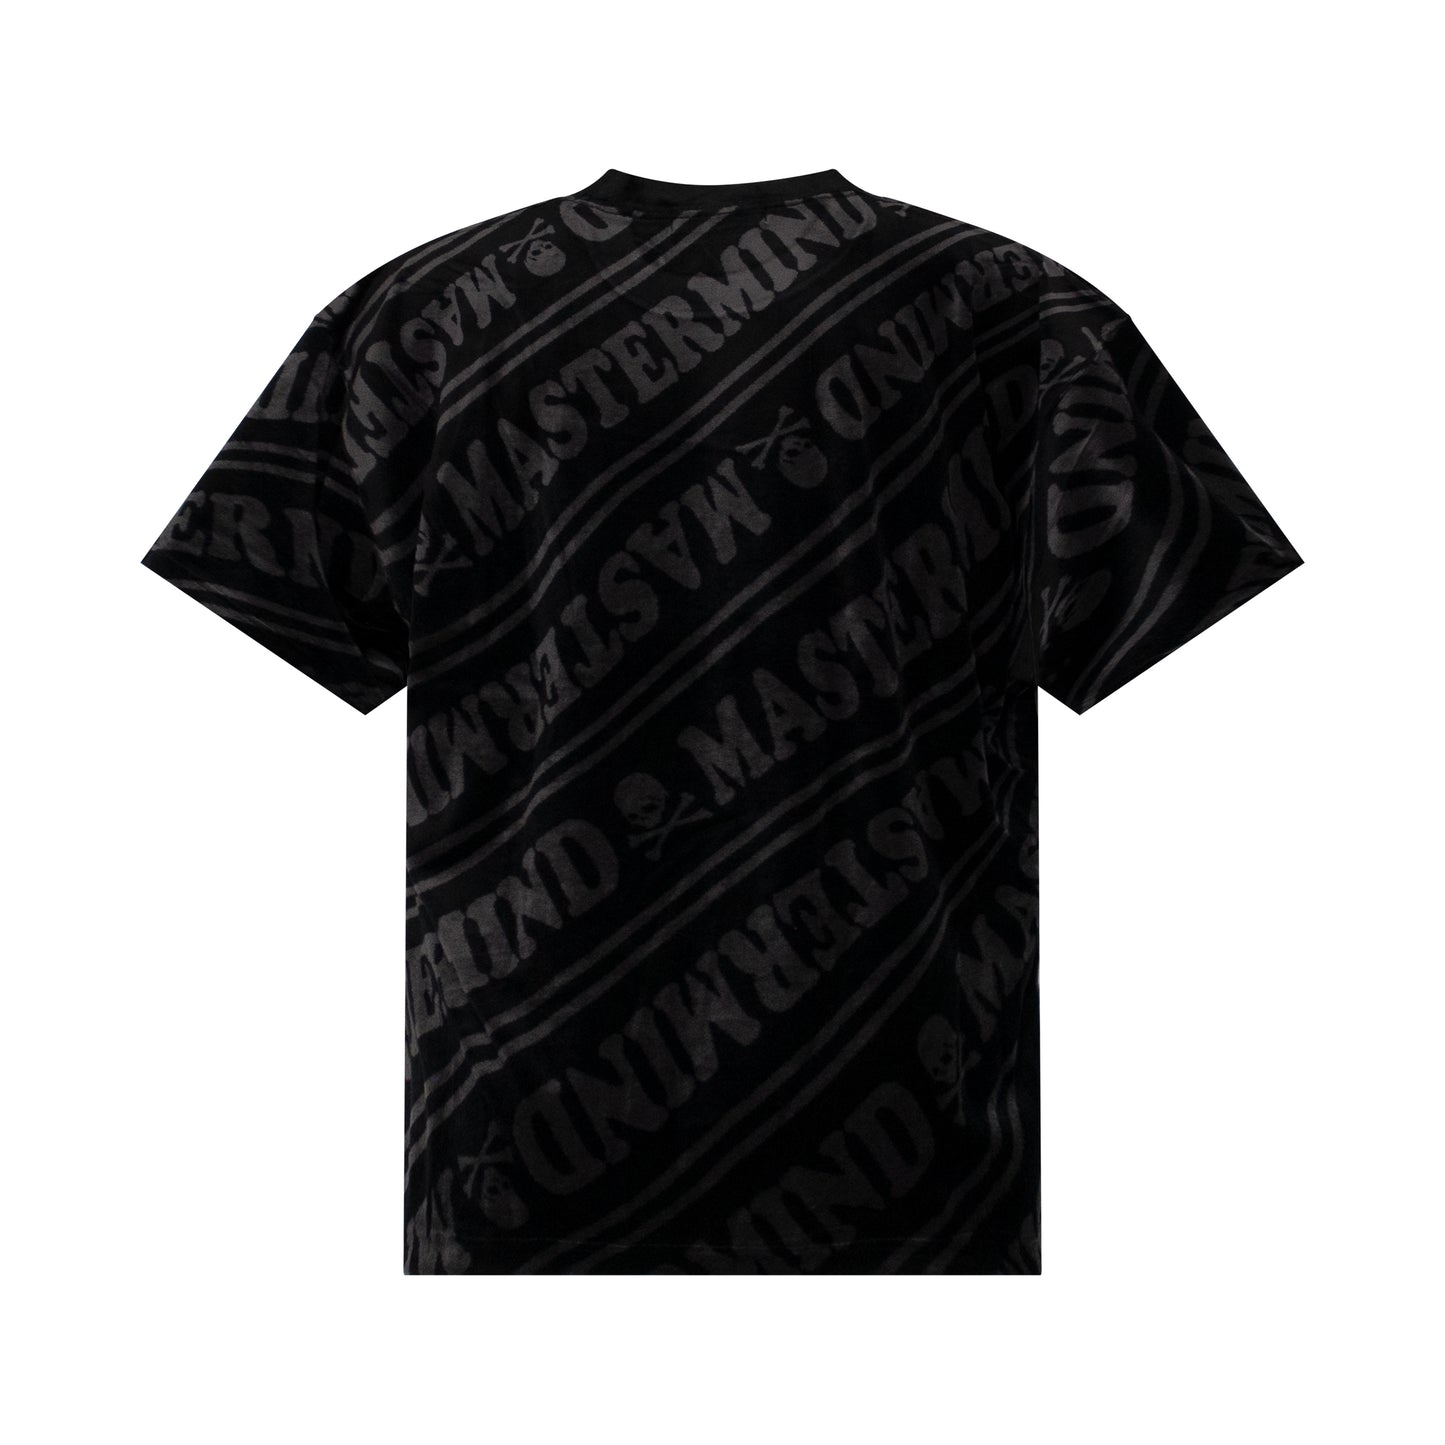 Mastermind World T-Shirts in Black/Charcoal